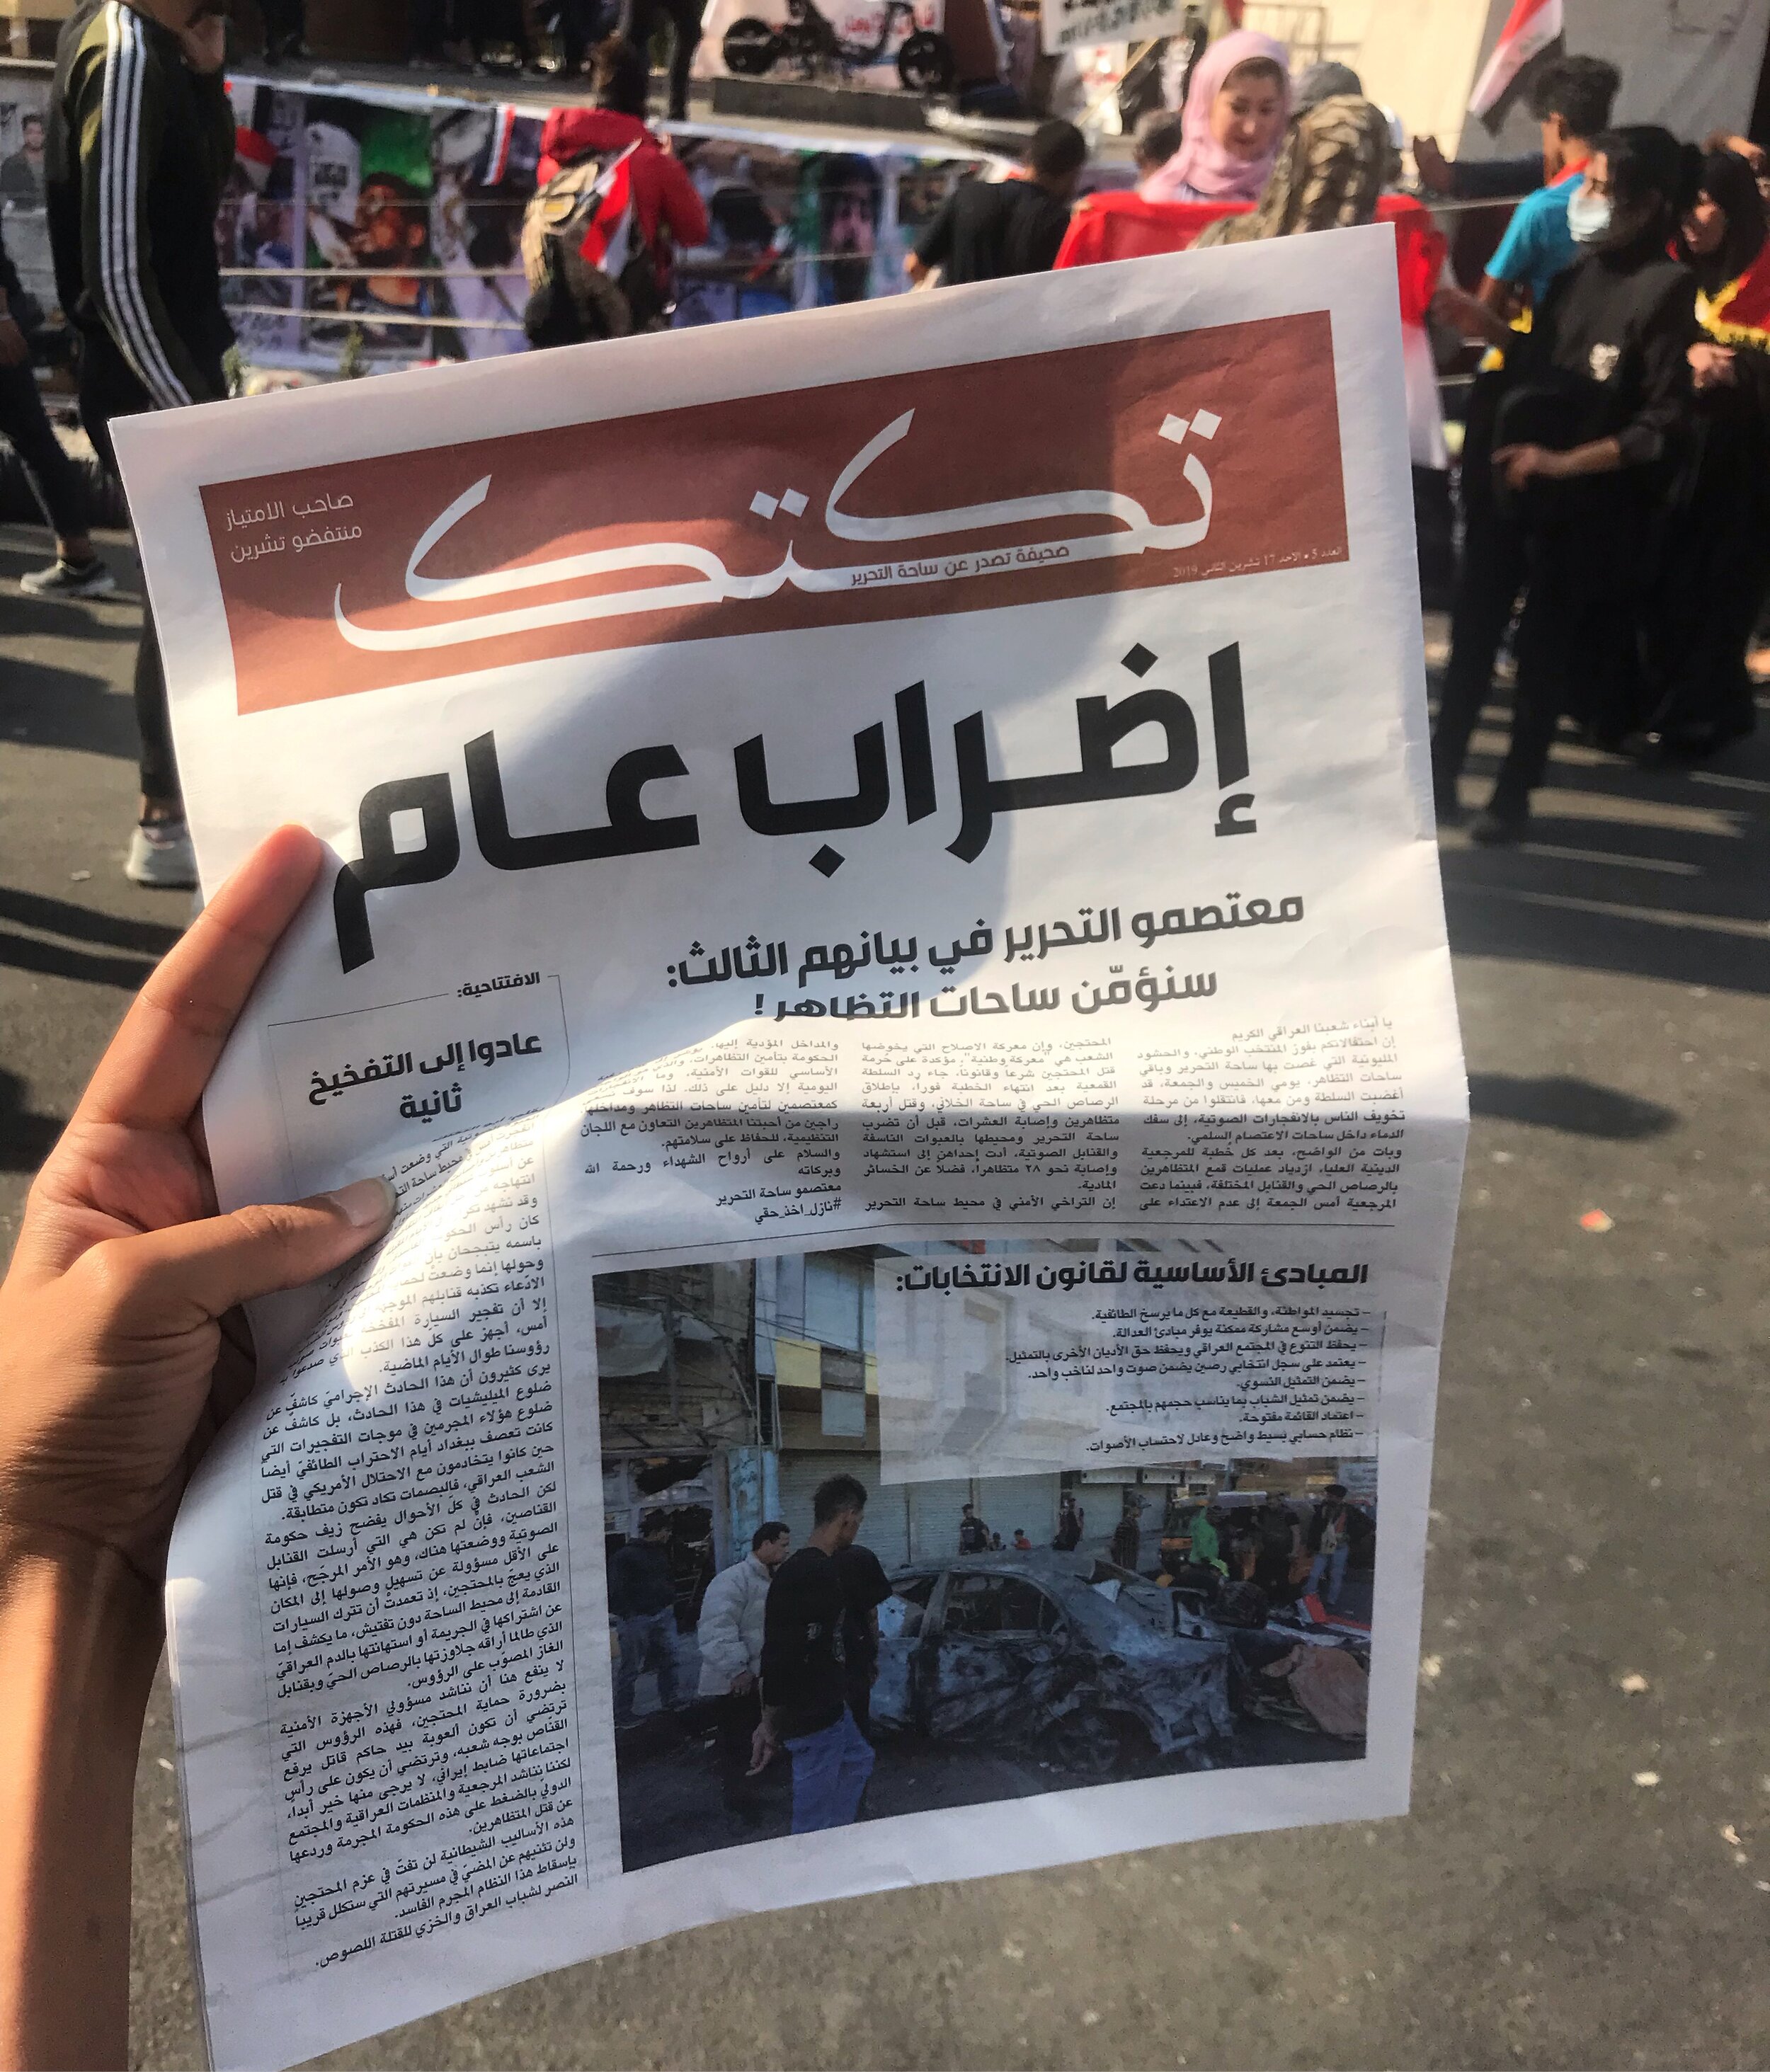  BAGHDAD | Working under a cloud of secrecy, a group of six labor swiftly to publish thousands of copies of “Tuk Tuk,” a newspaper purporting to represent the voice of demonstrators, who first took to the streets in the tens of thousands to decry ram